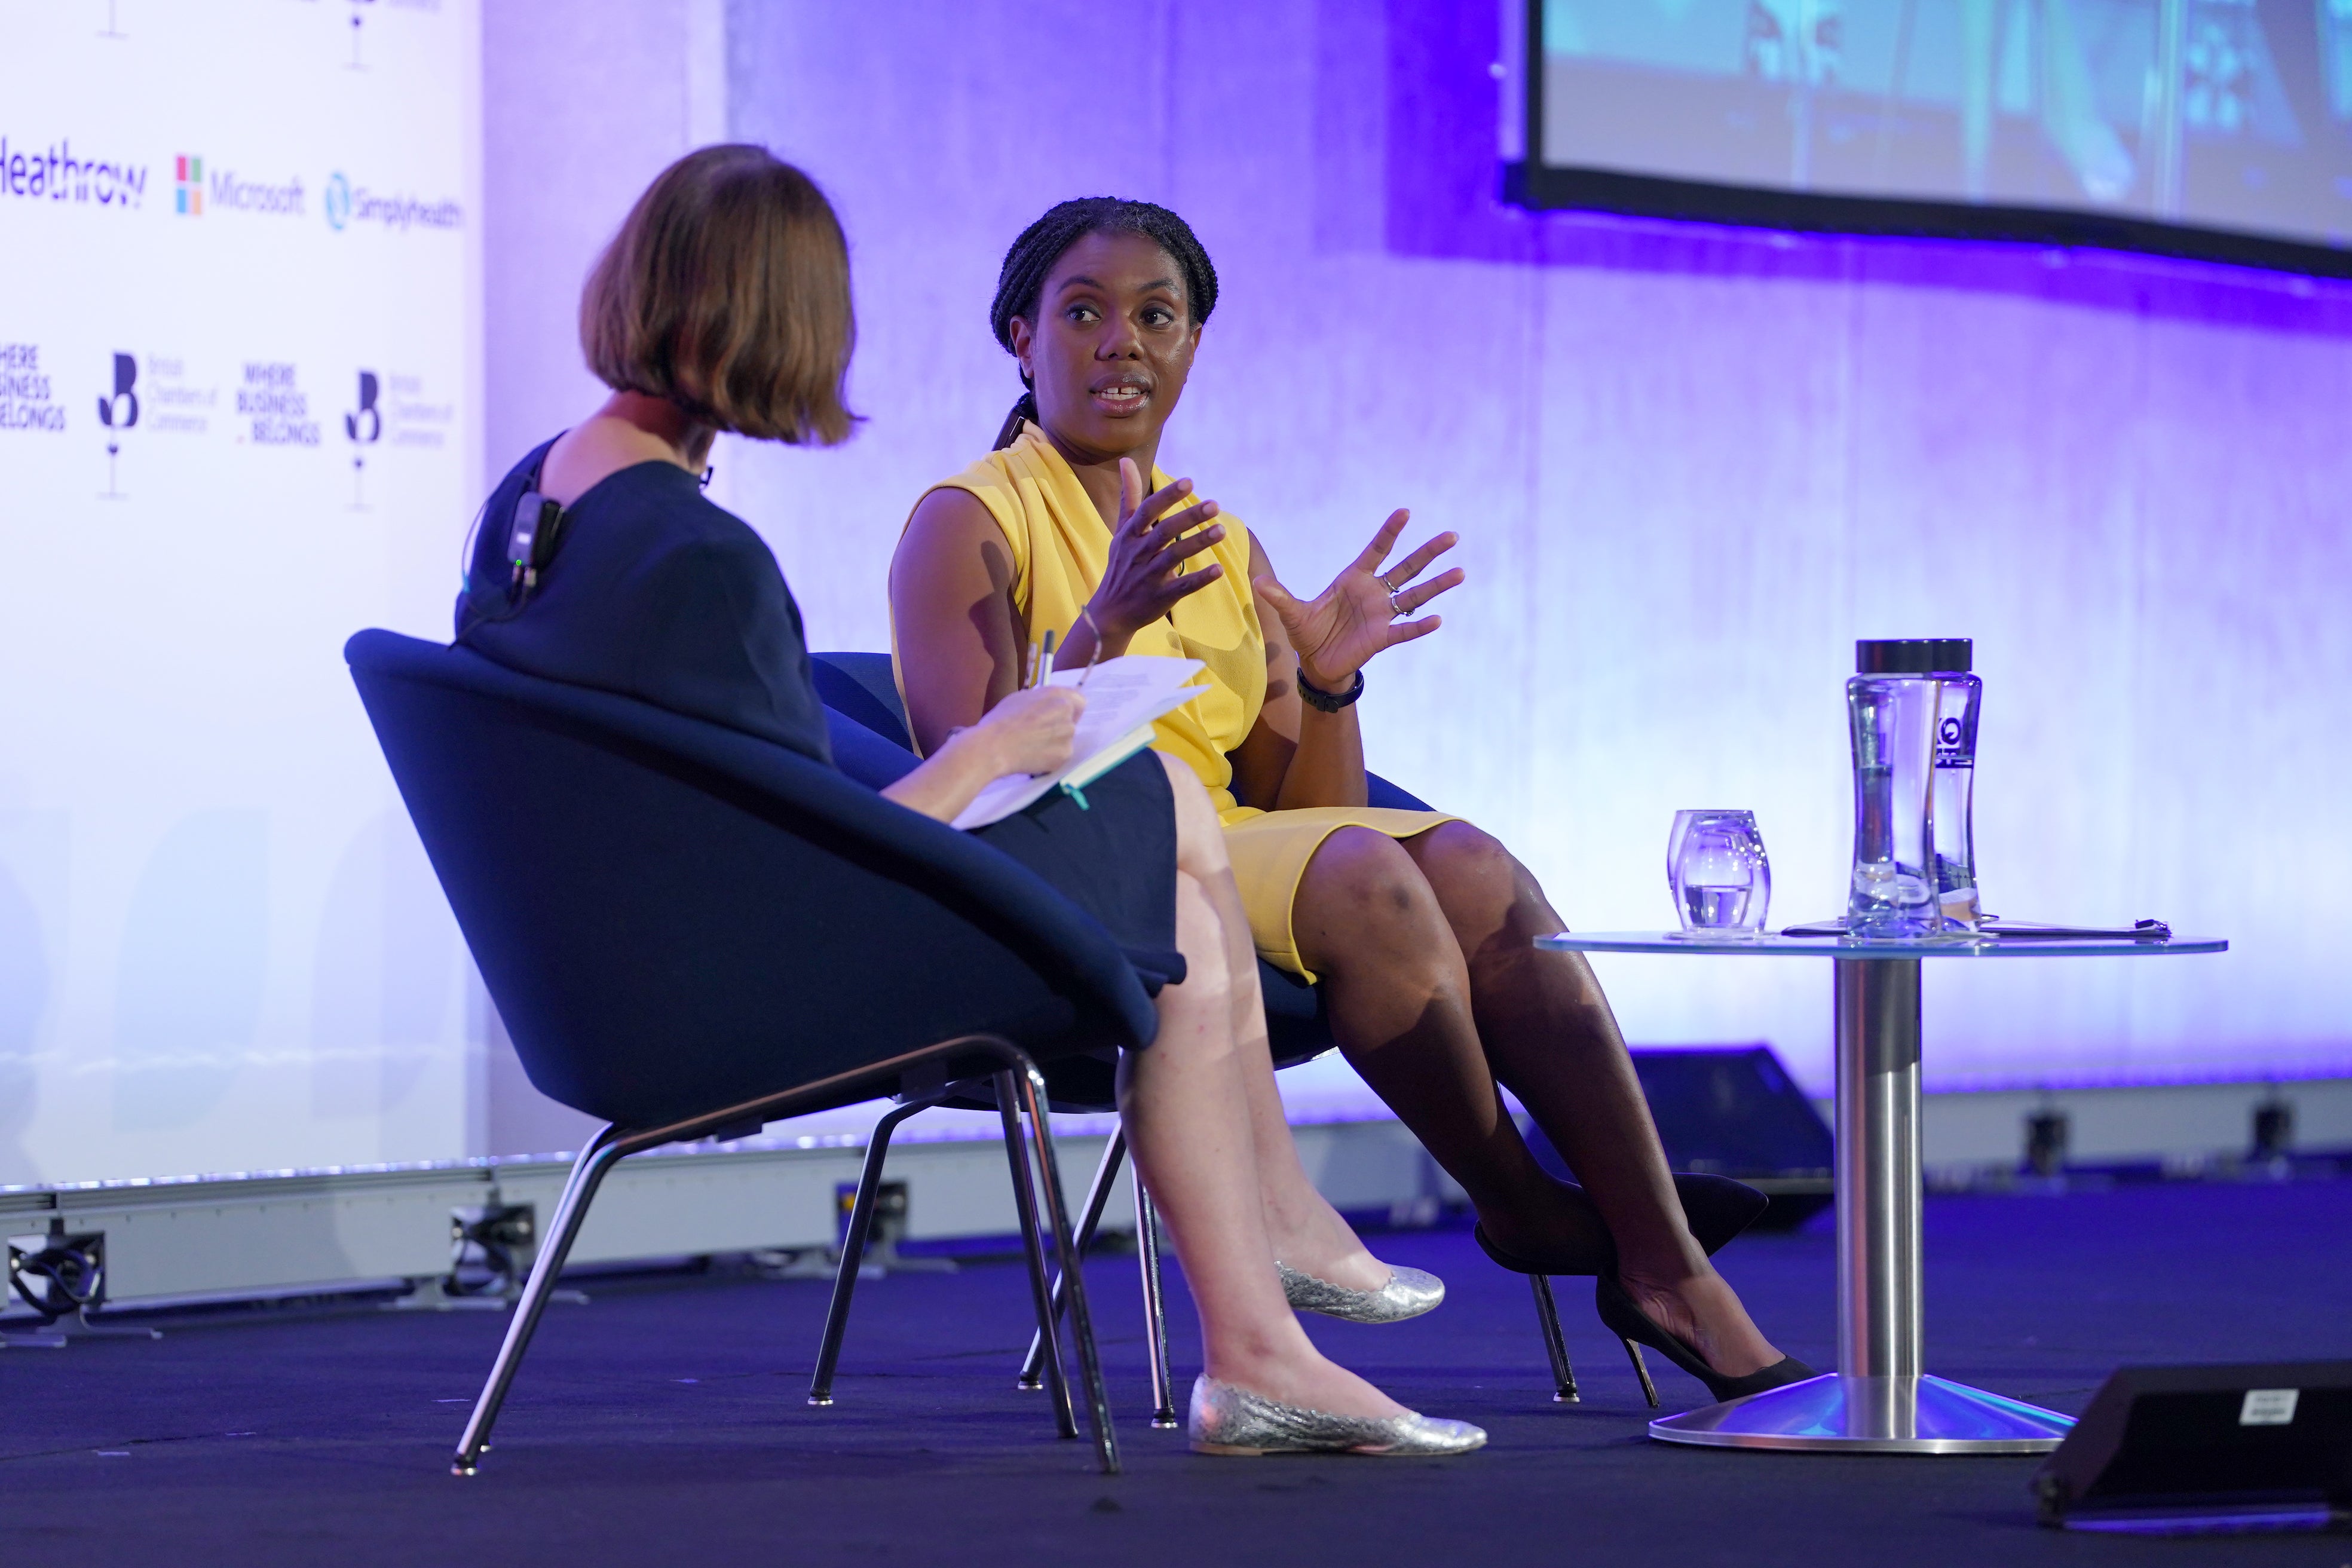 Kemi Badenoch took questions at The British Chambers of Commerce annual conference in Westminster (Lucy North/PA)